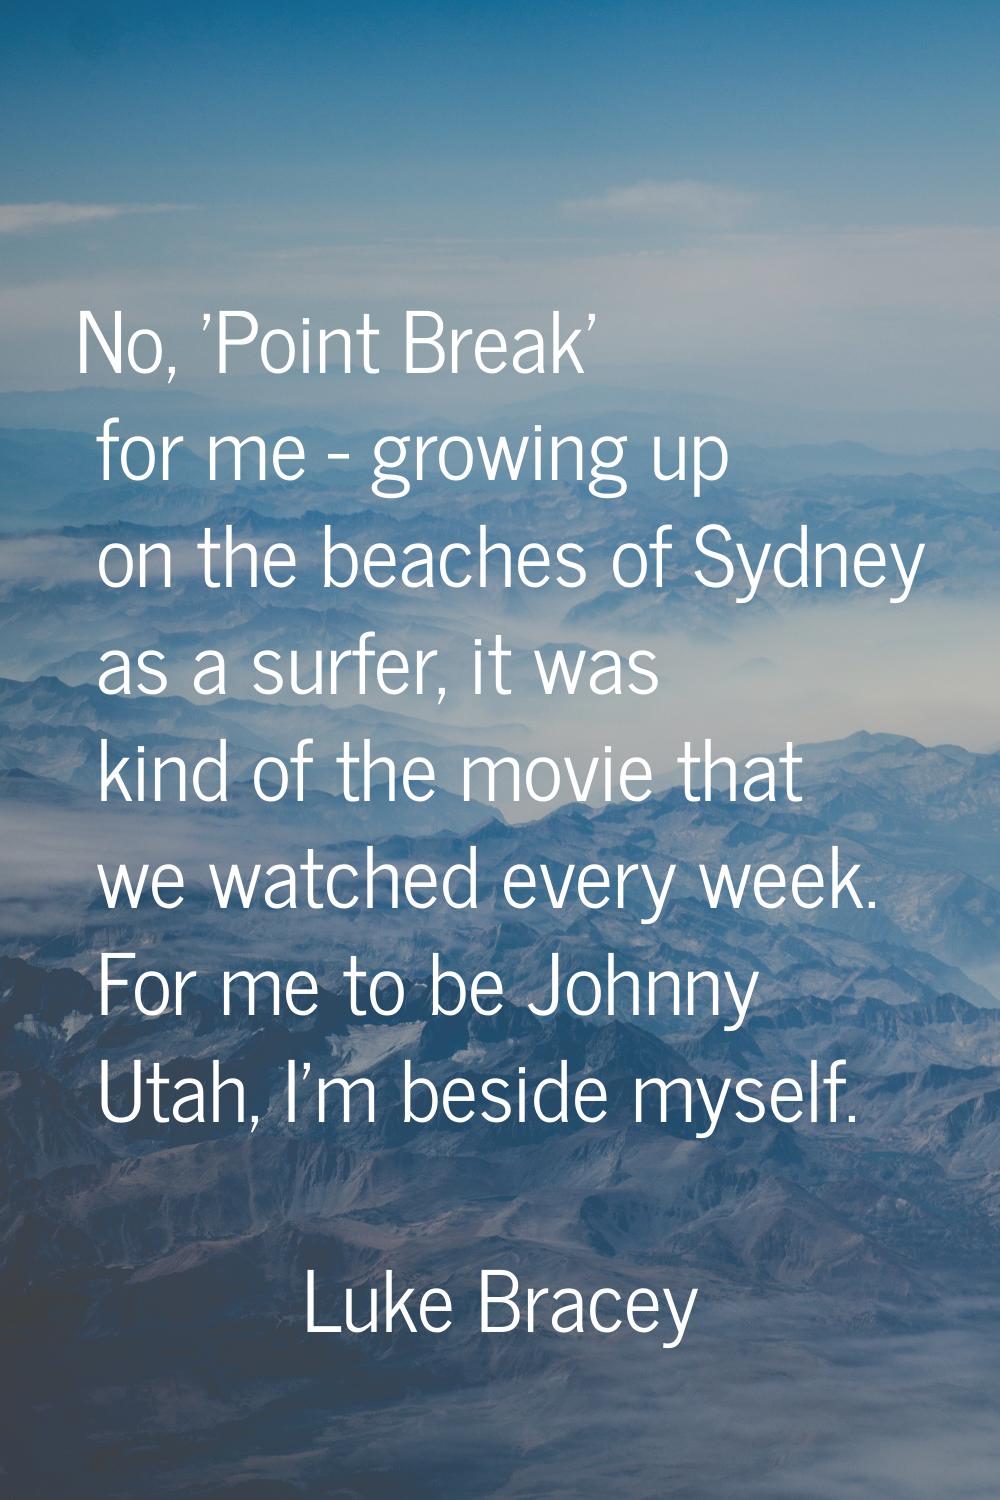 No, 'Point Break' for me - growing up on the beaches of Sydney as a surfer, it was kind of the movi